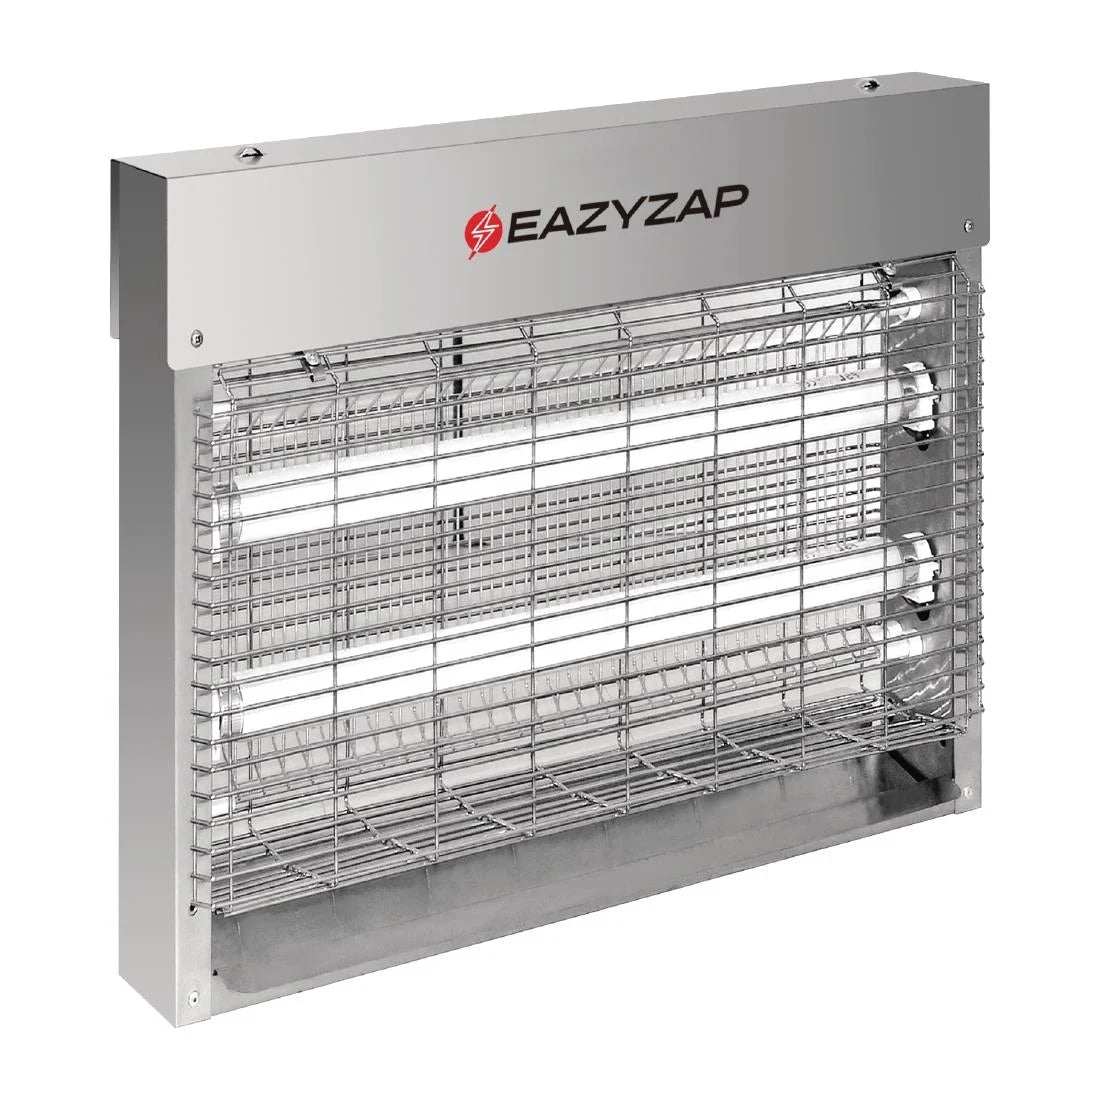 Eazyzap Energy Efficient Stainless Steel LED Fly Killer 30m².Product Ref:00735.Model:FP983. 🚚 3-5 Days Delivery